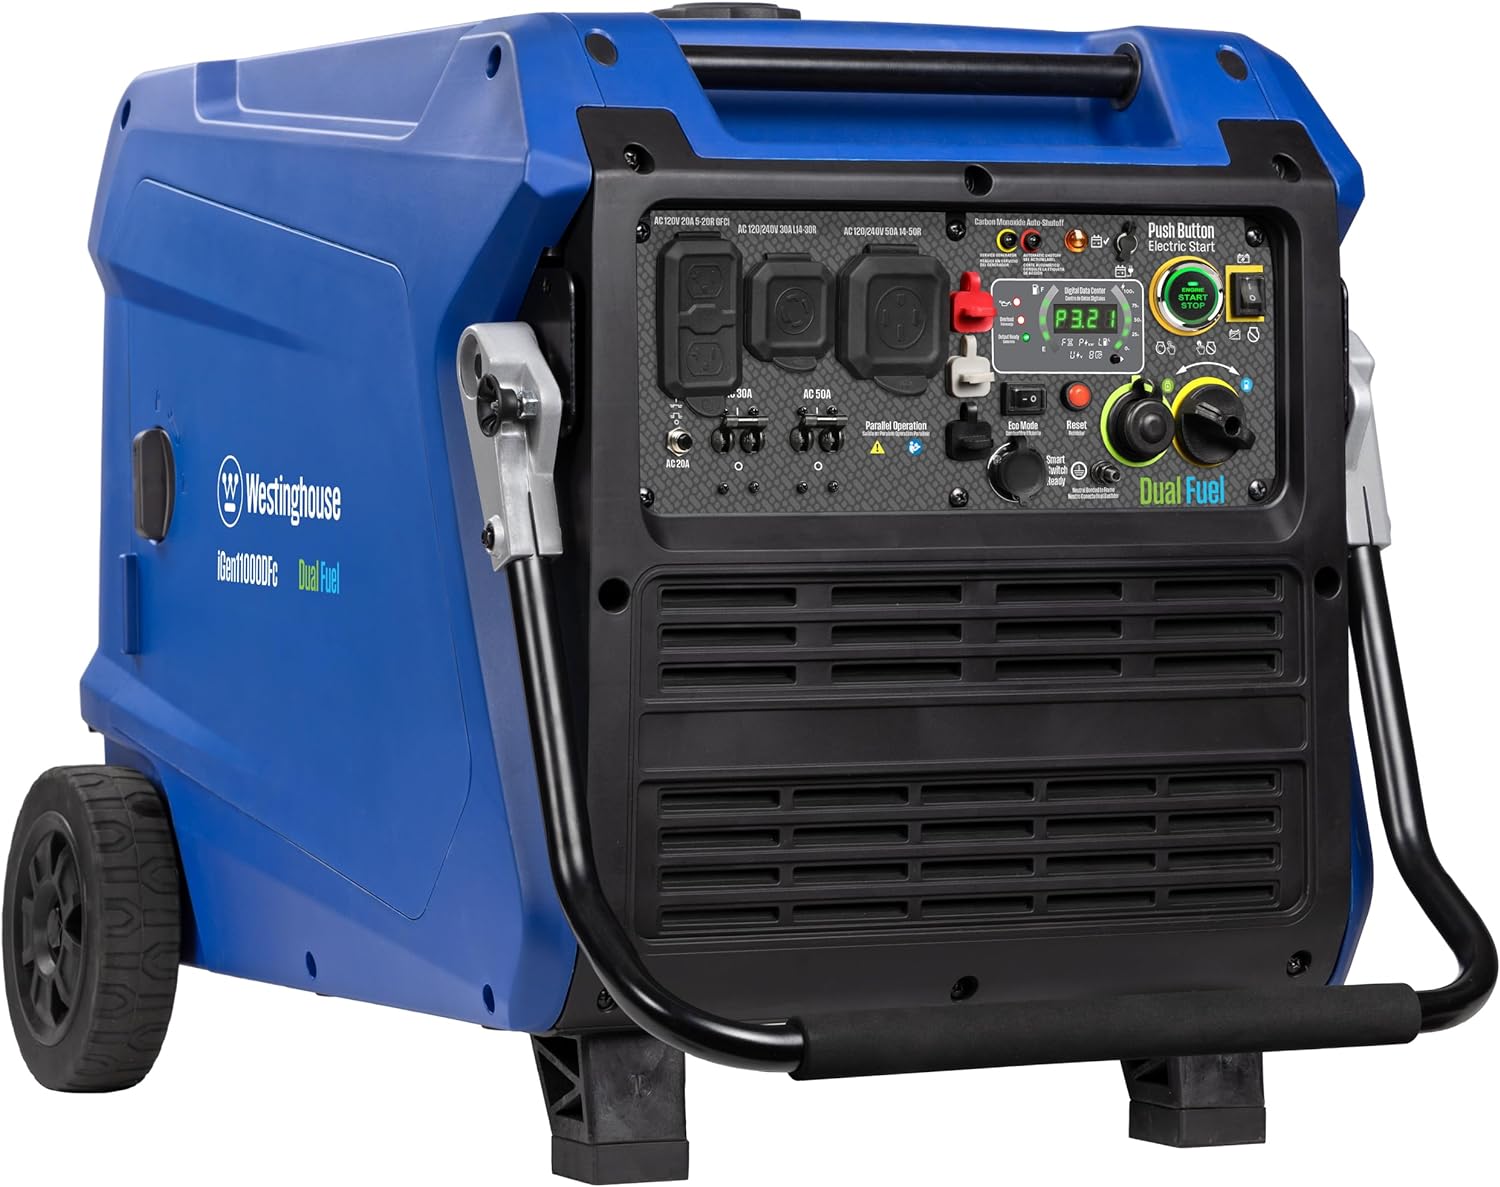 Westinghouse Outdoor Power Equipment 12500 Peak Watt Dual Fuel Home Backup Portable Generator, Remote Electric Start, Transfer Switch Ready, Gas and Propane Powered, CARB Compliant - Westinghouse Portable Generator Review